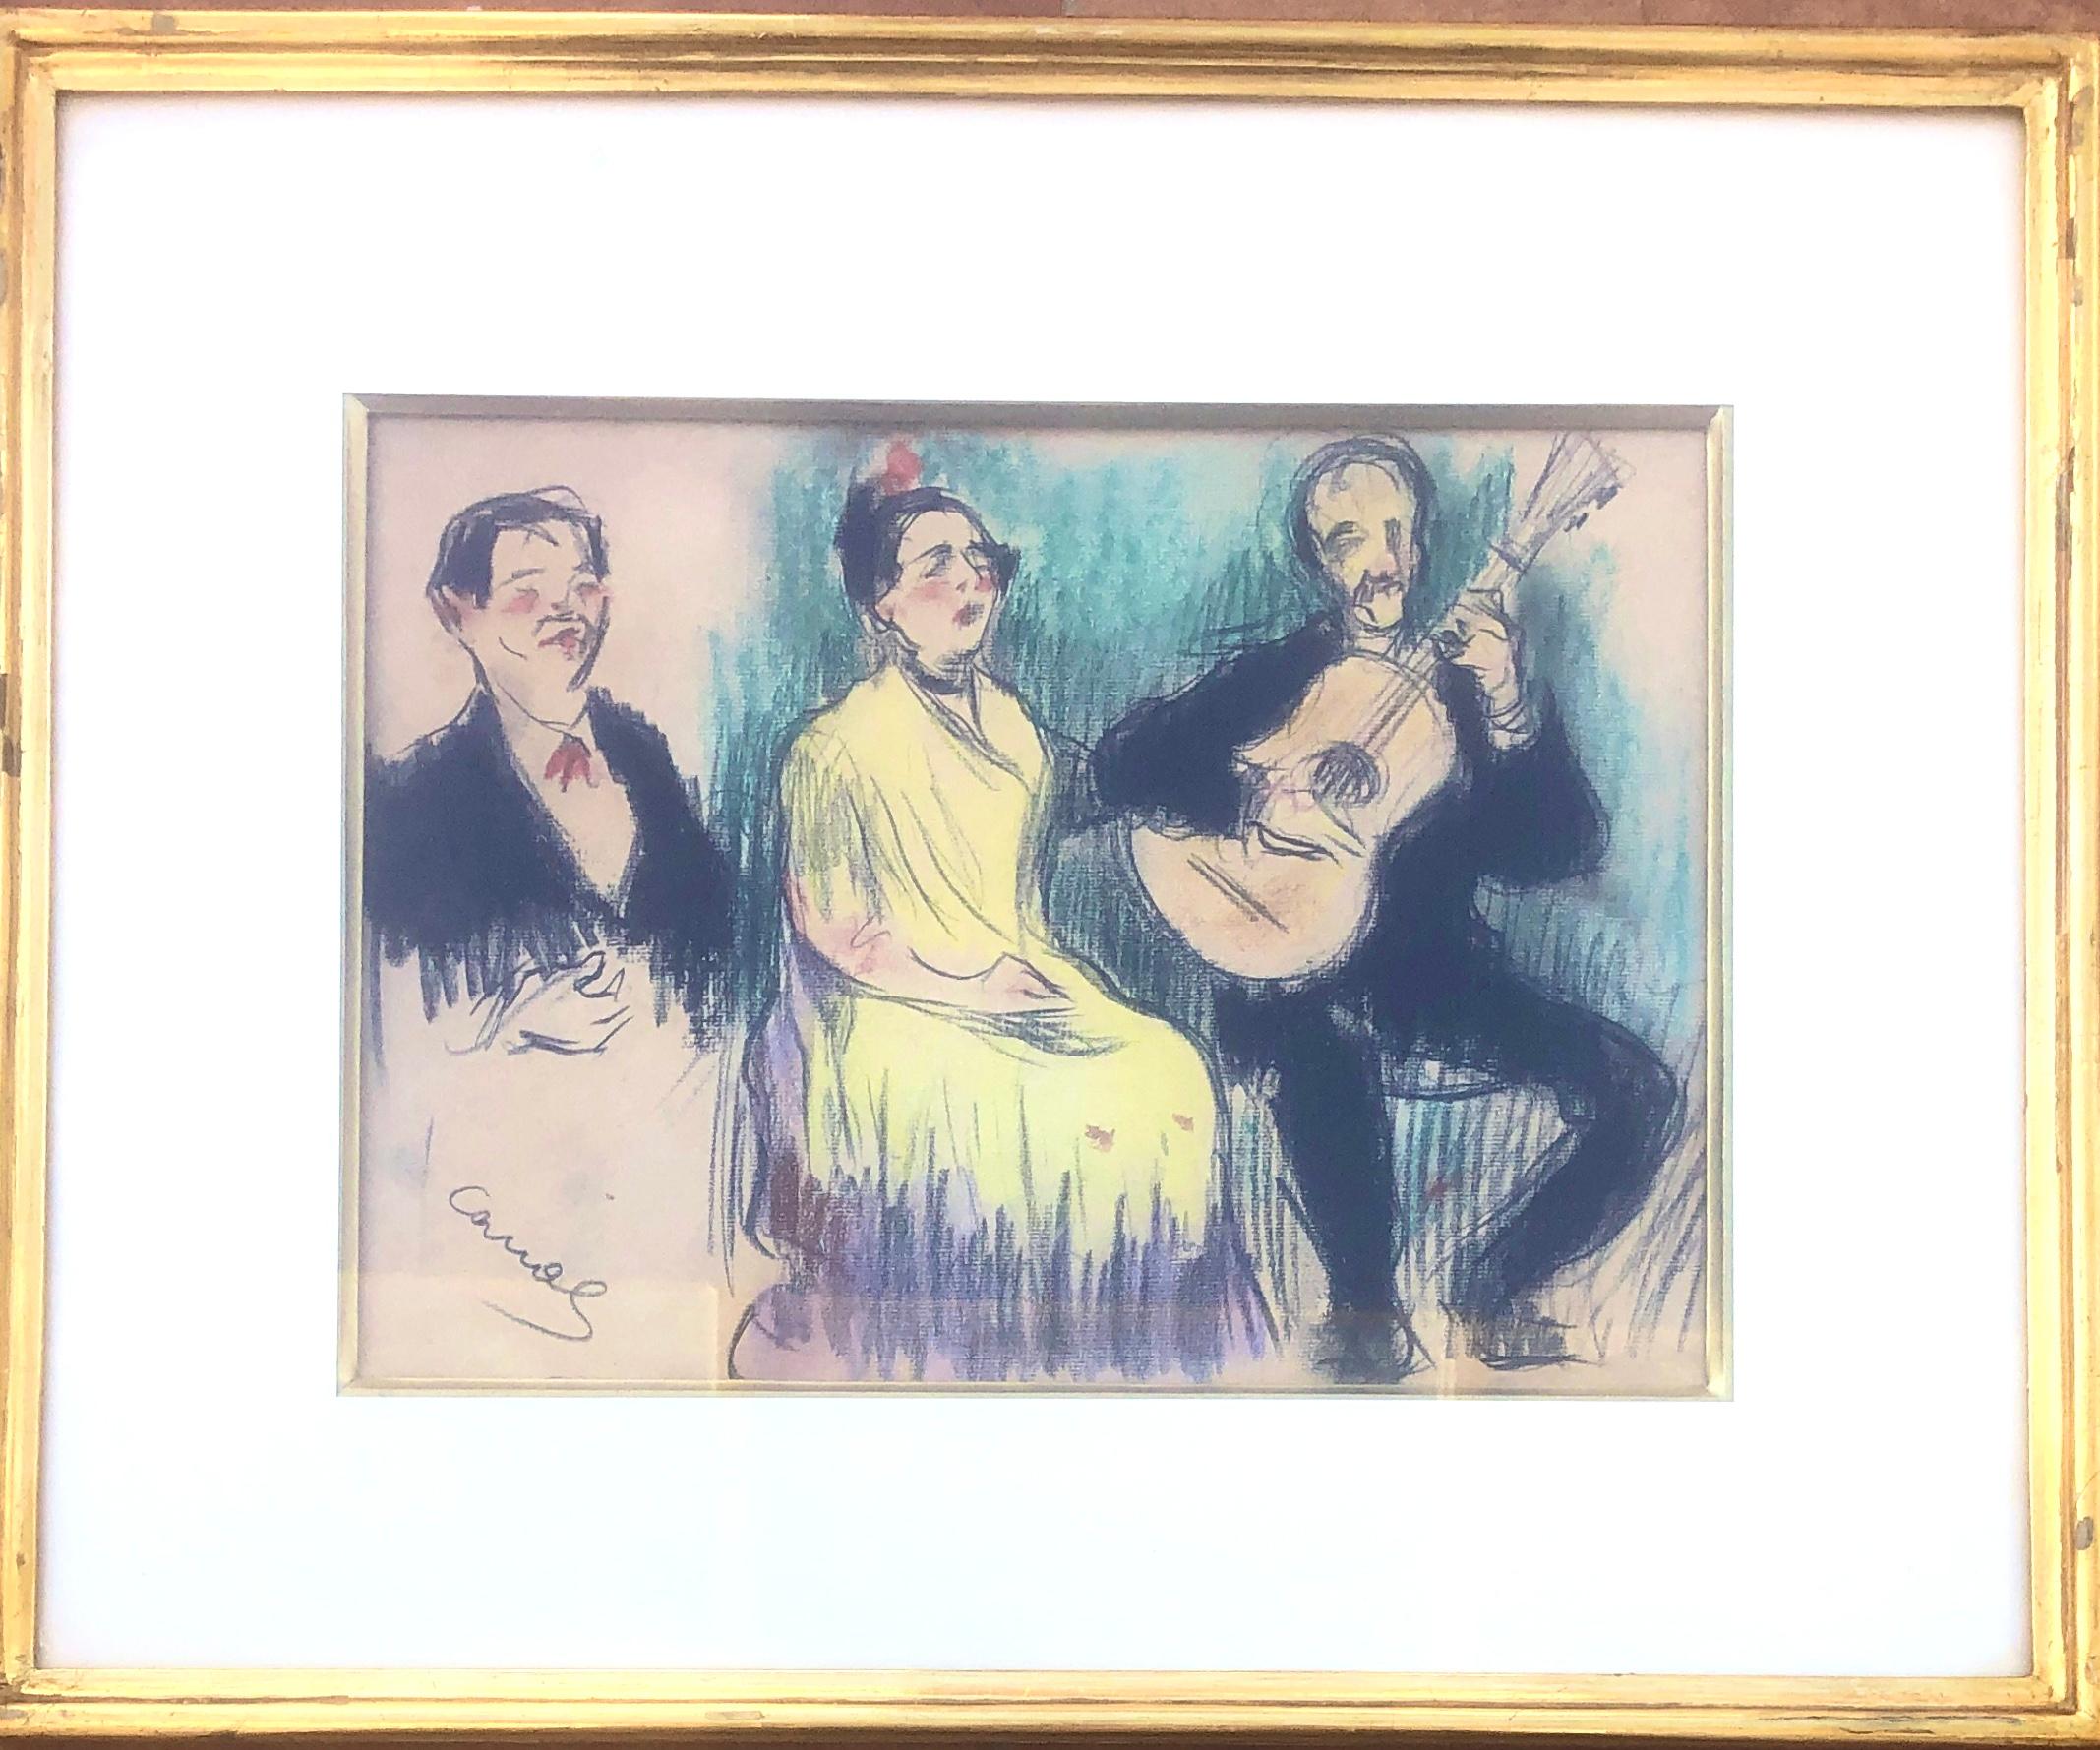 Flamenco musicians drawing colored pencils spanish modernism - Art by Ricard Canals Llambí